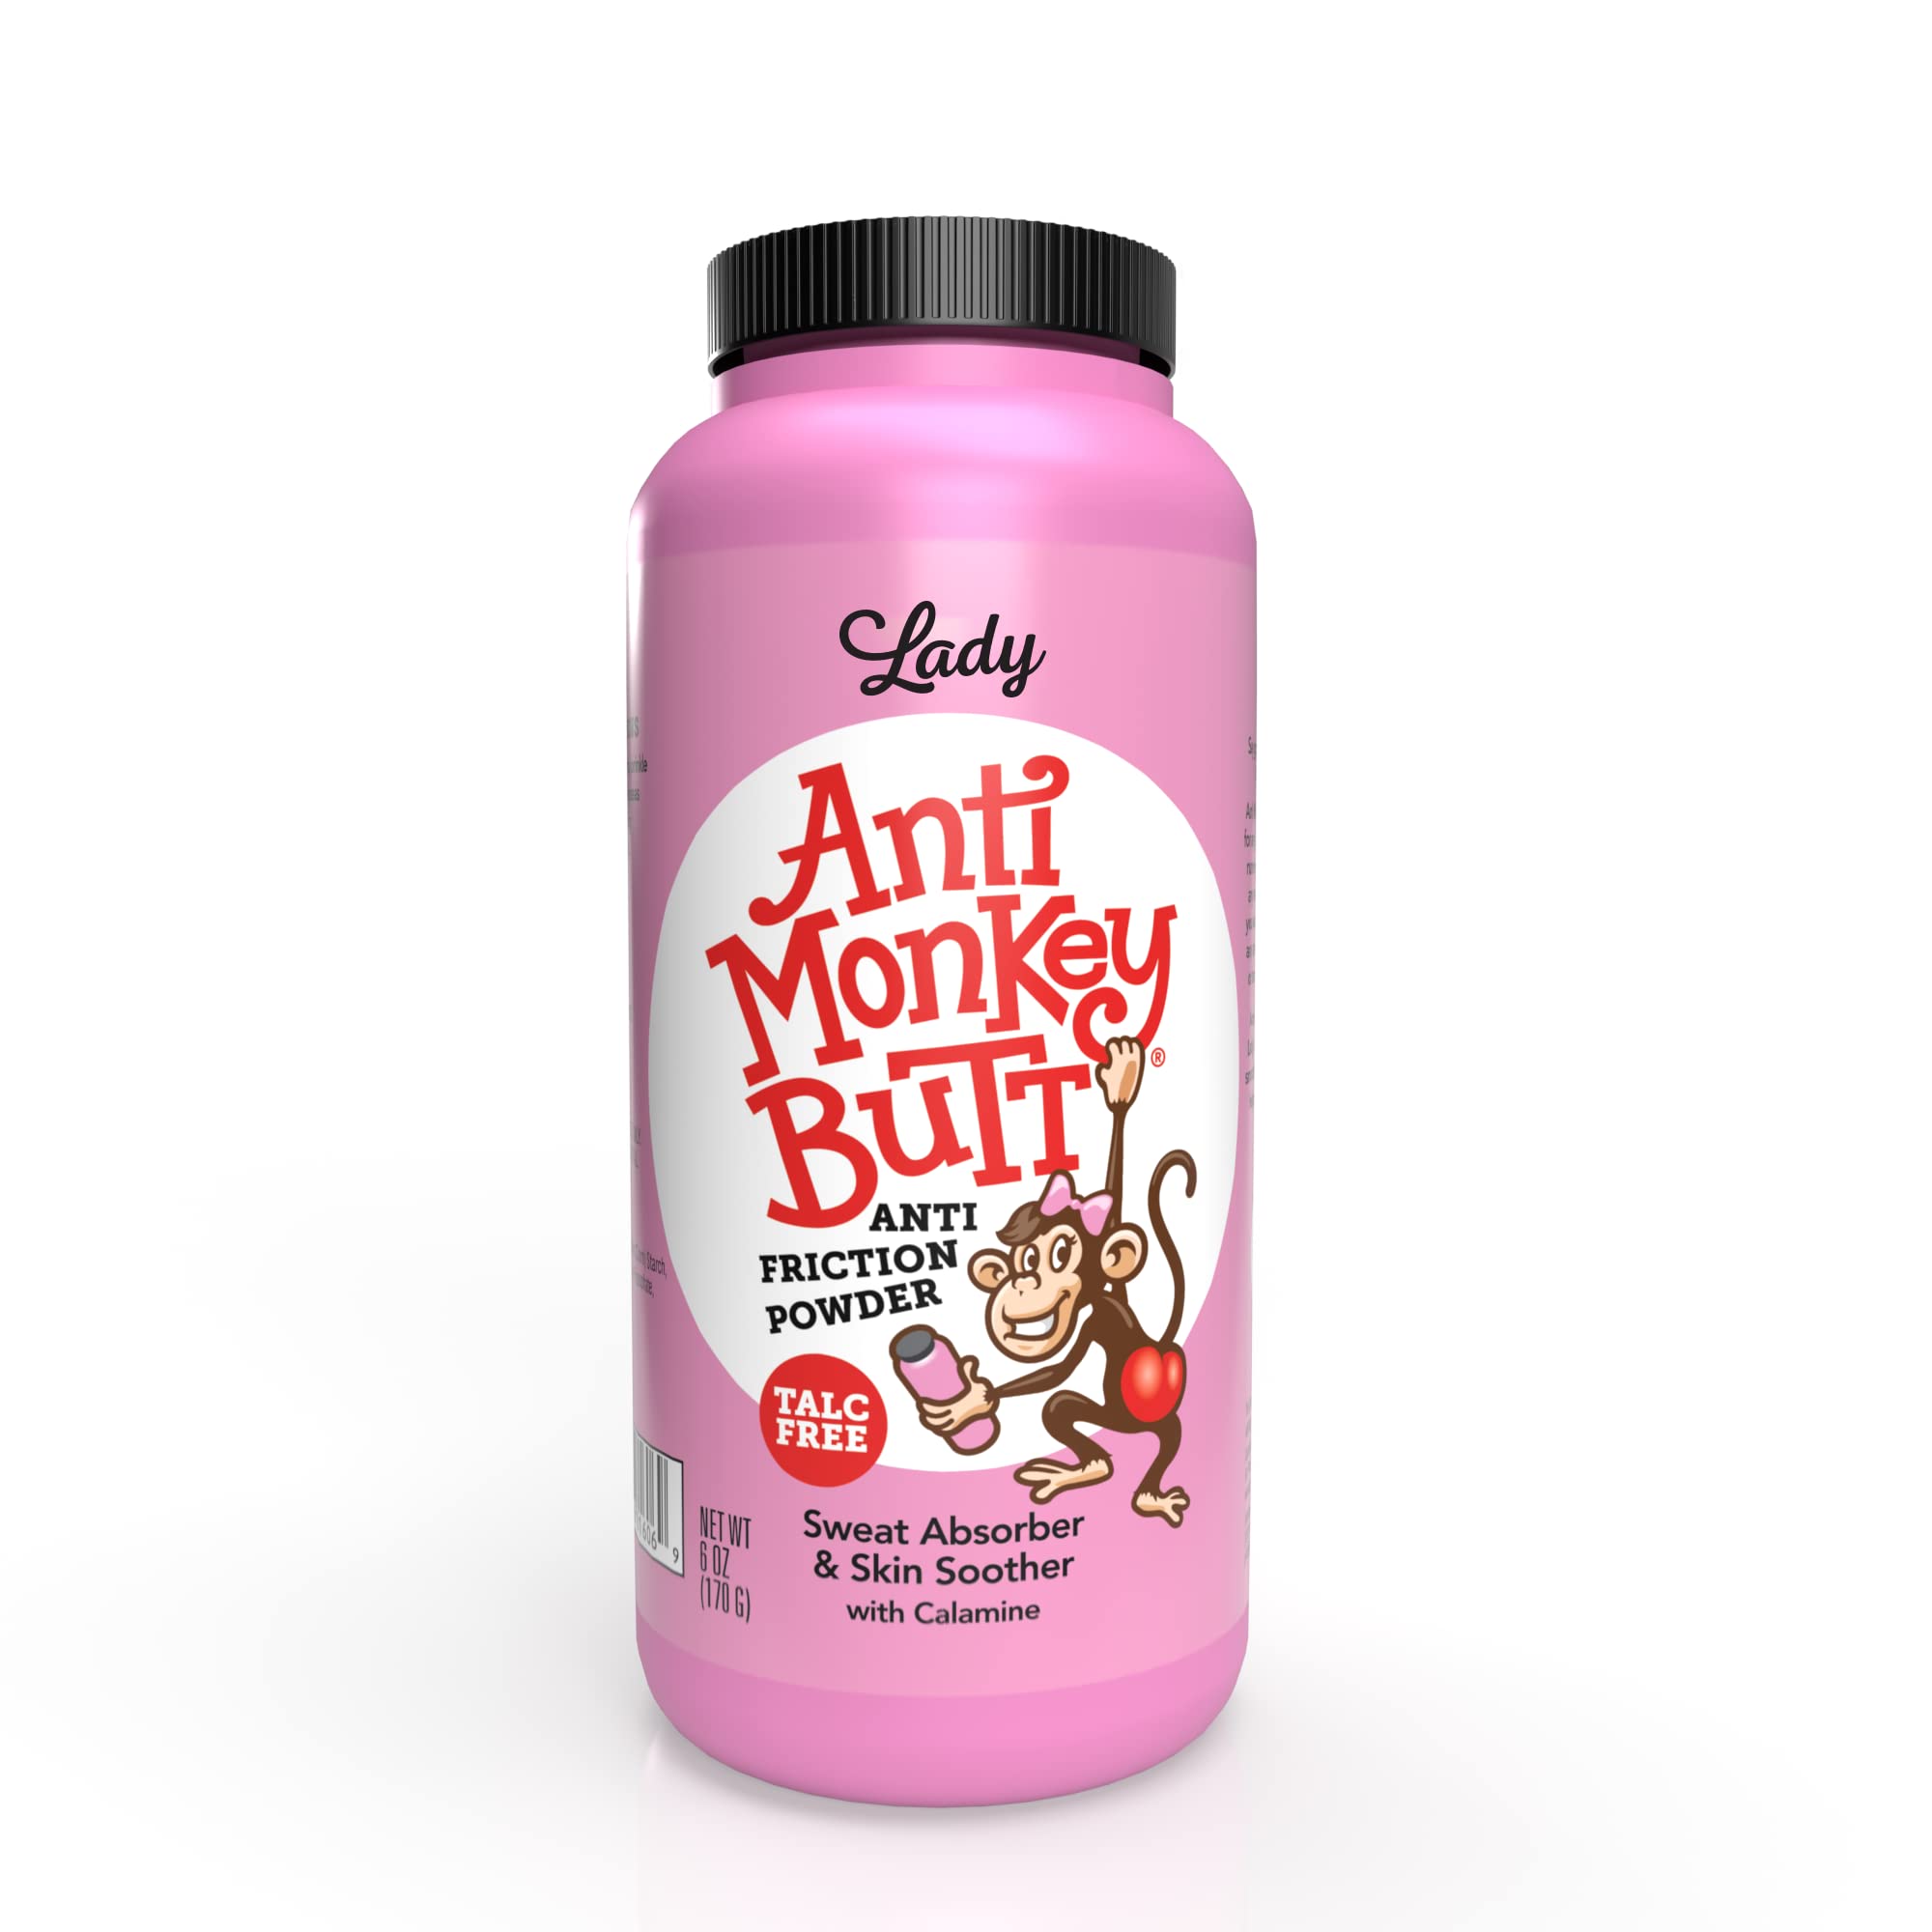 Lady Anti Monkey Butt | Women's Body Powder with Calamine | Prevents Chafing and Absorbs Sweat | Talc Free | 6 Ounces